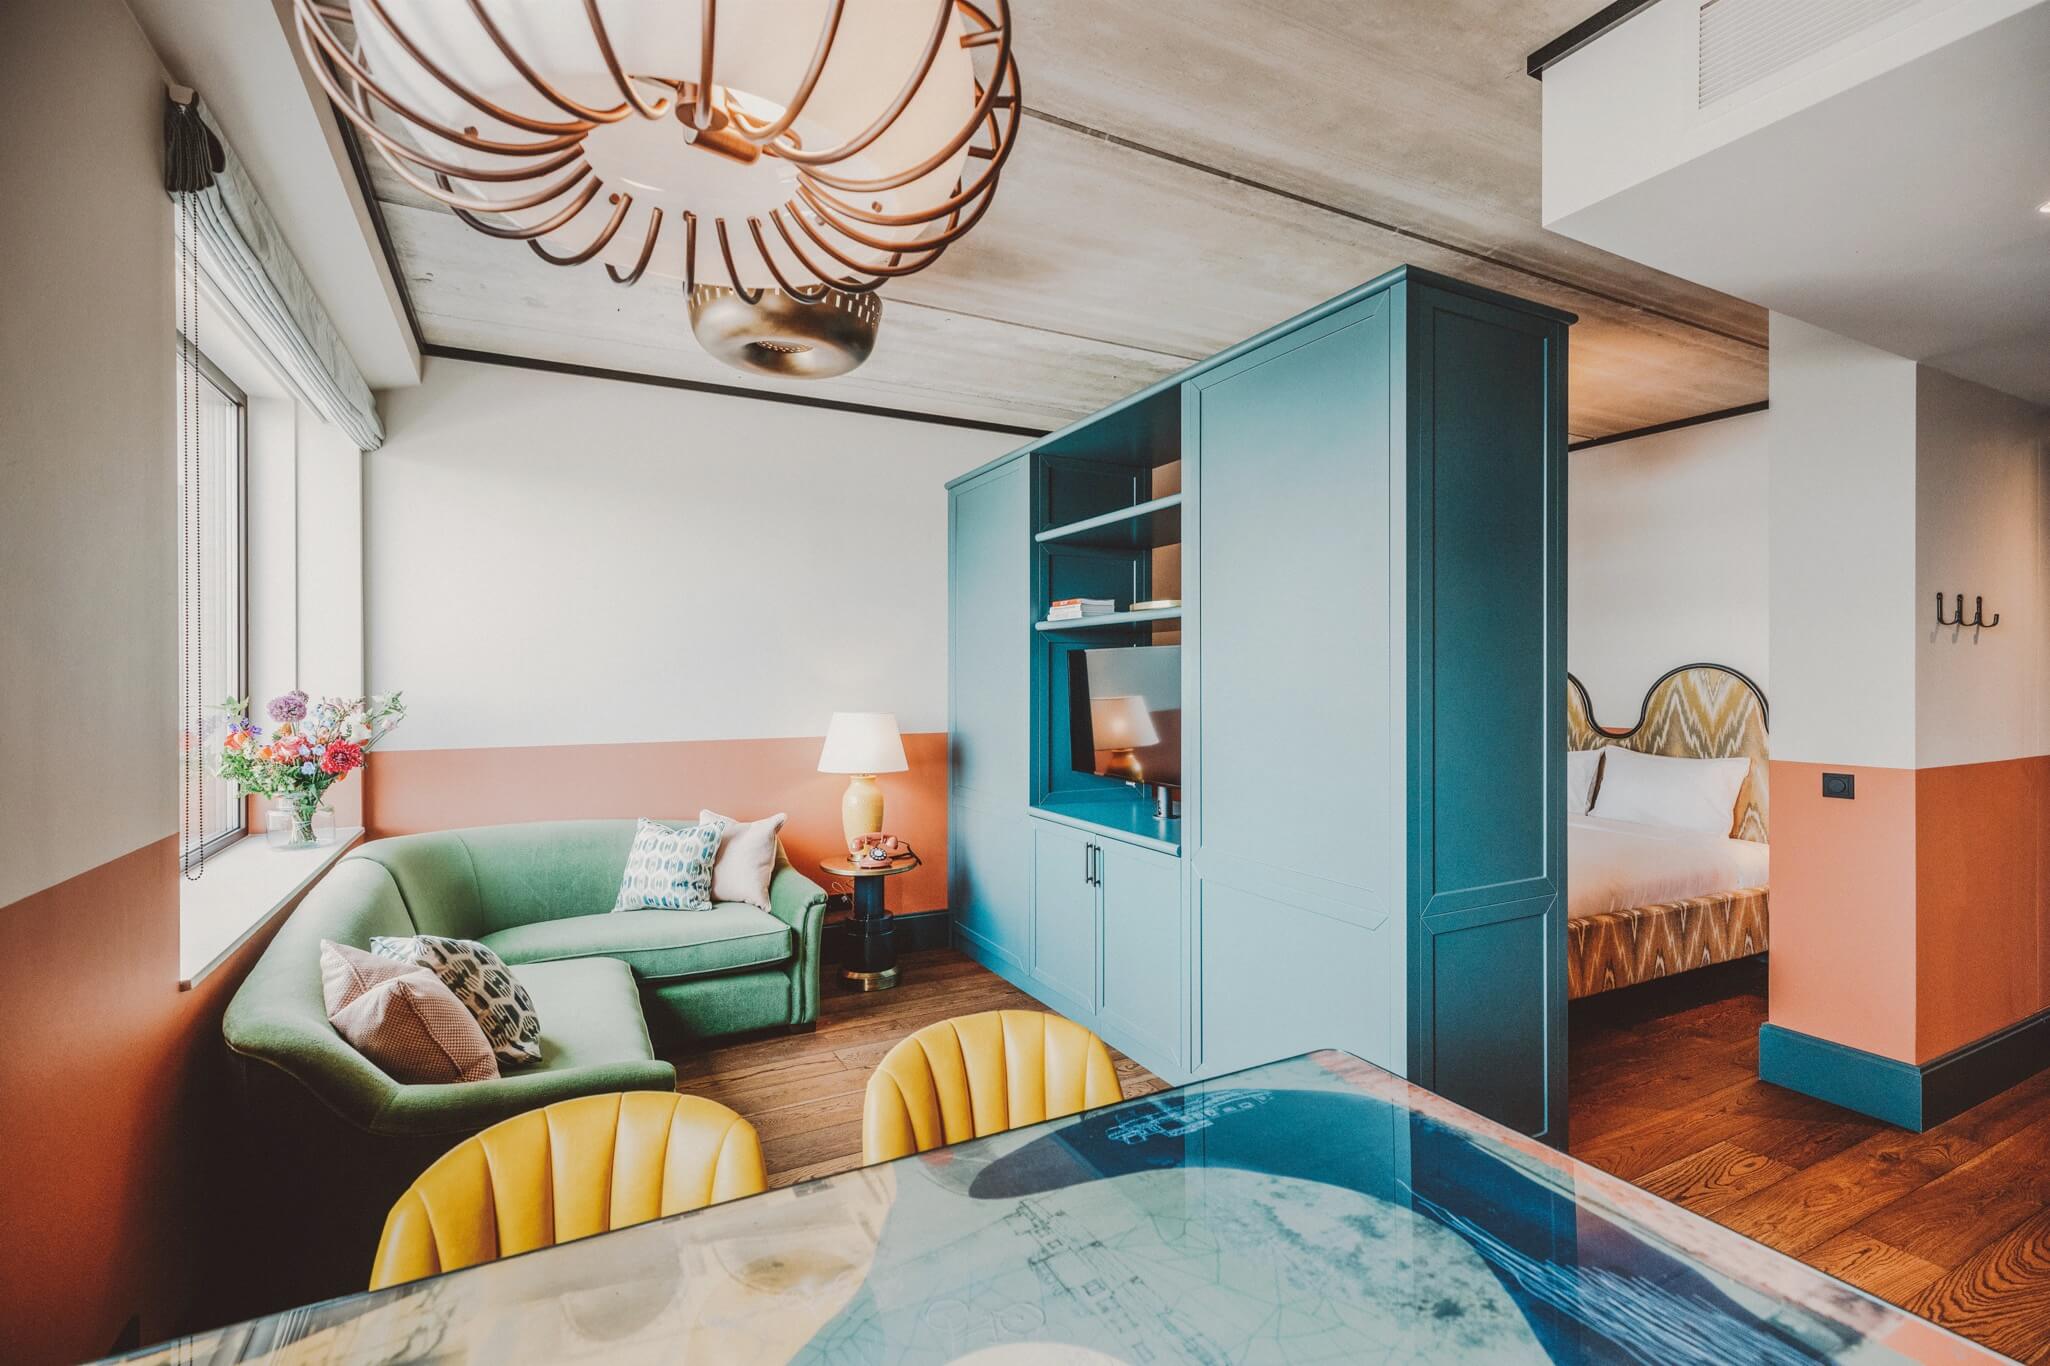 BOAT&CO AMSTERDAM: PRACHTIG LUXE APARTHOTEL IN DE UPCOMING HOUTHAVENS